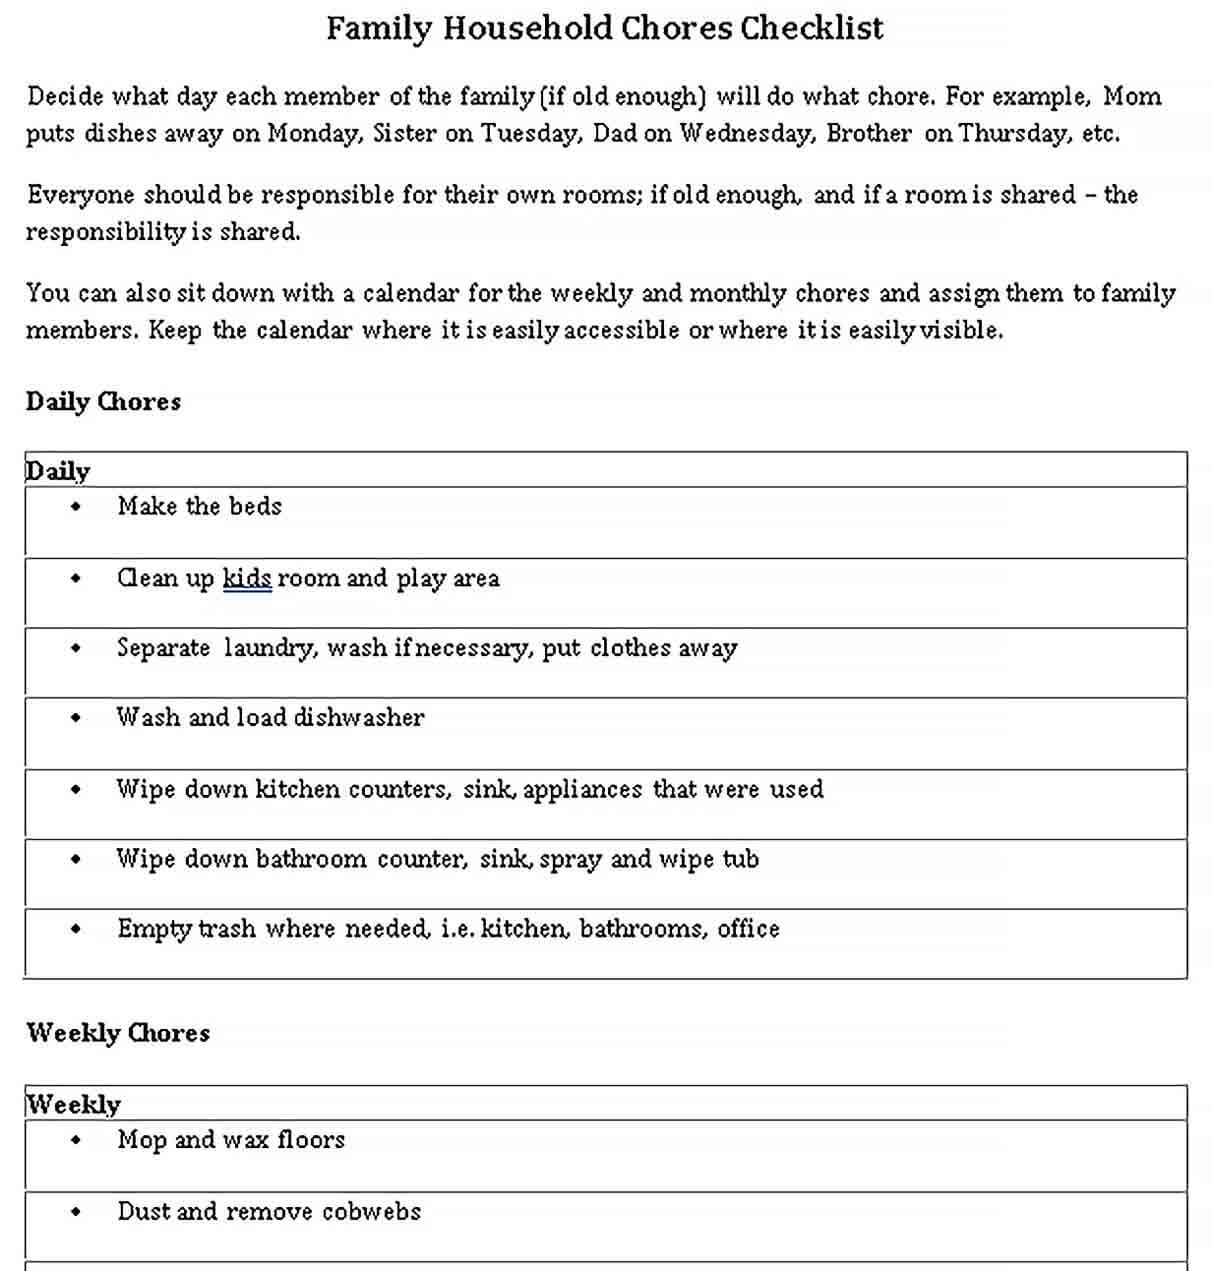 Sample Family Household Chores Checklist Template